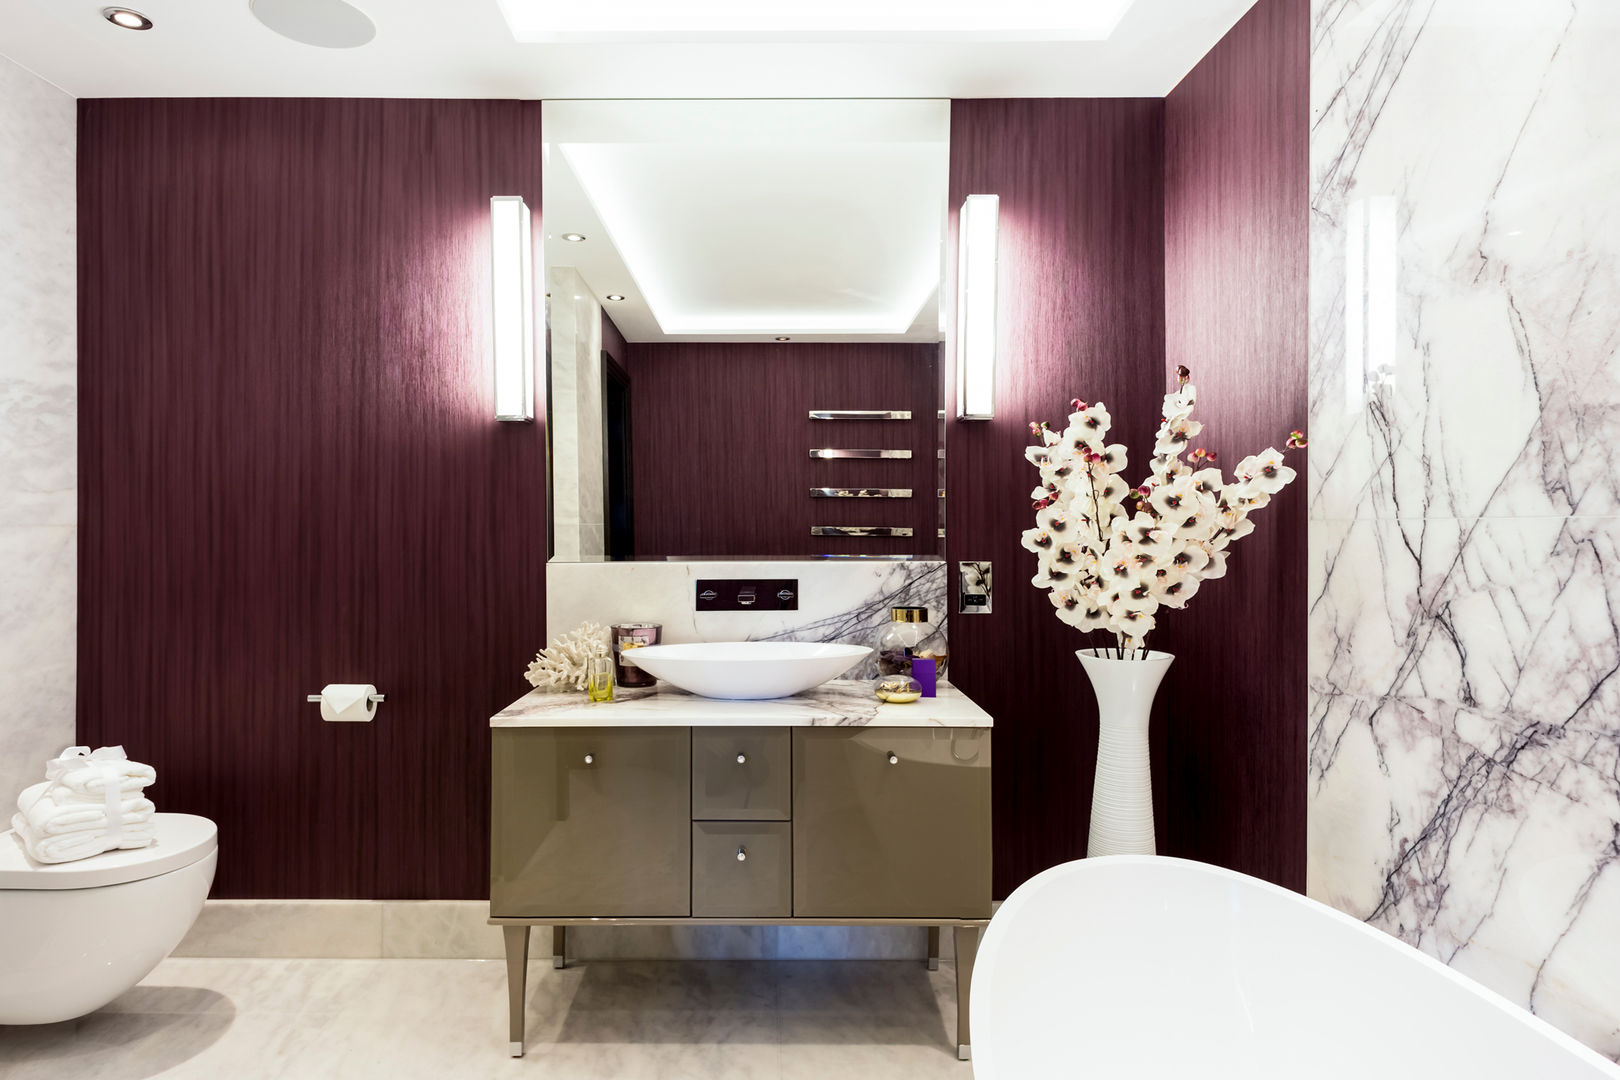 St James Park, Westminster SW1H, London | Penthouse alterations & refurbishment GOAStudio London residential architecture limited Modern style bathrooms